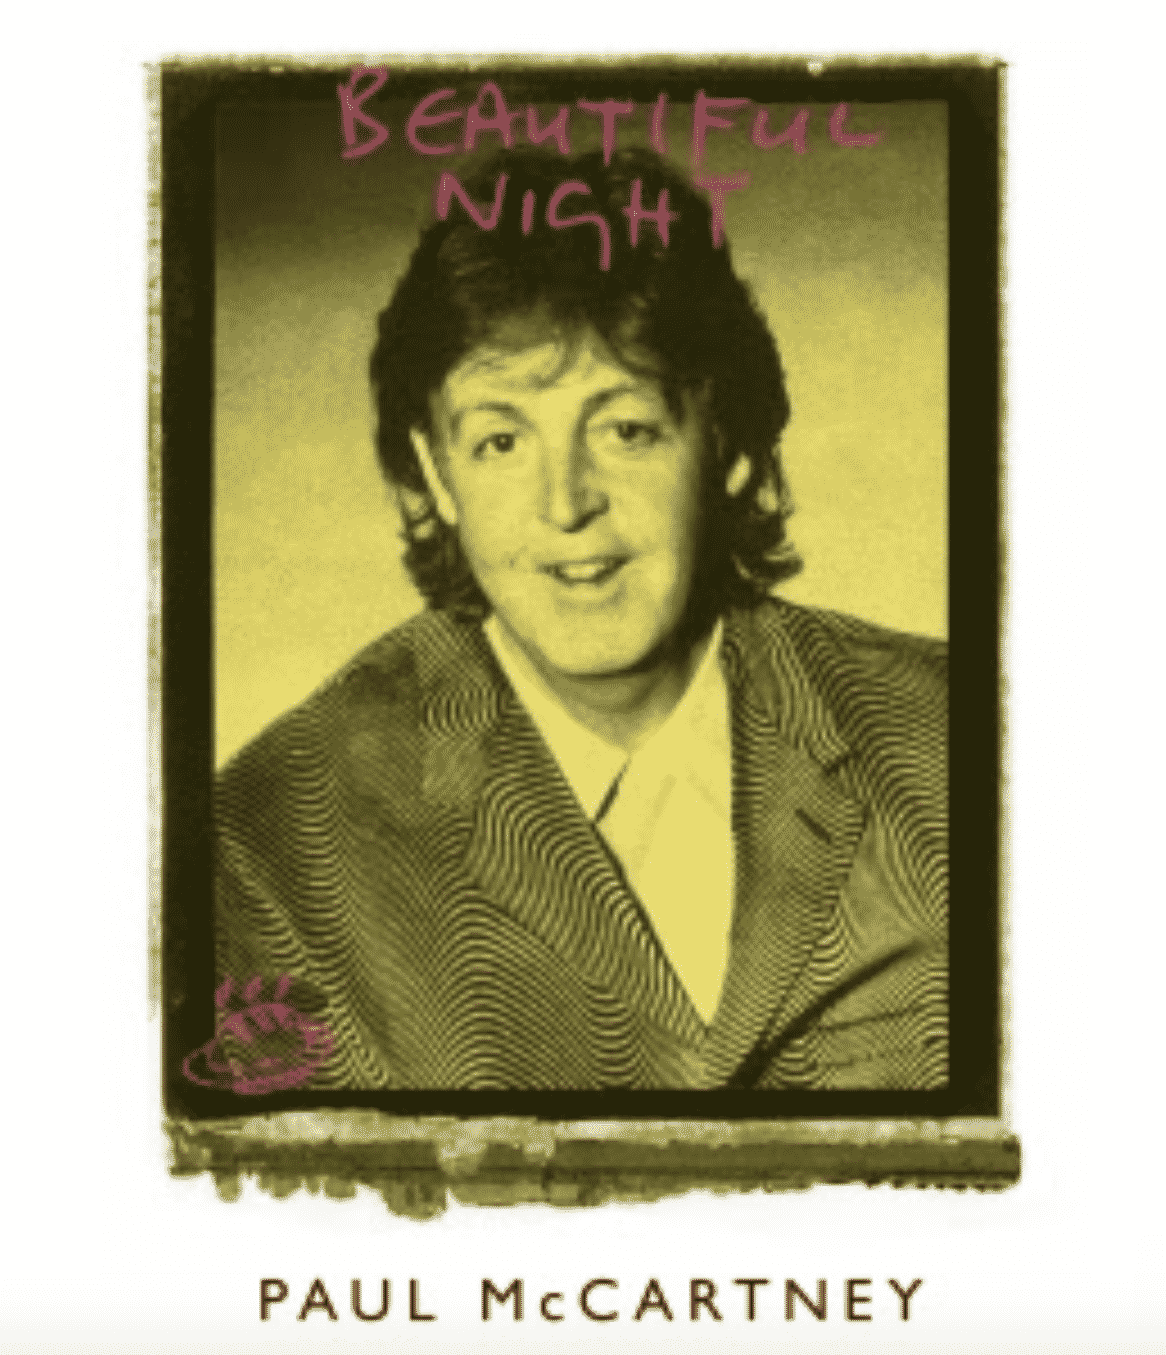 Paul McCartney, ‘Beautiful Night’ EP & Remastered Video Released Today